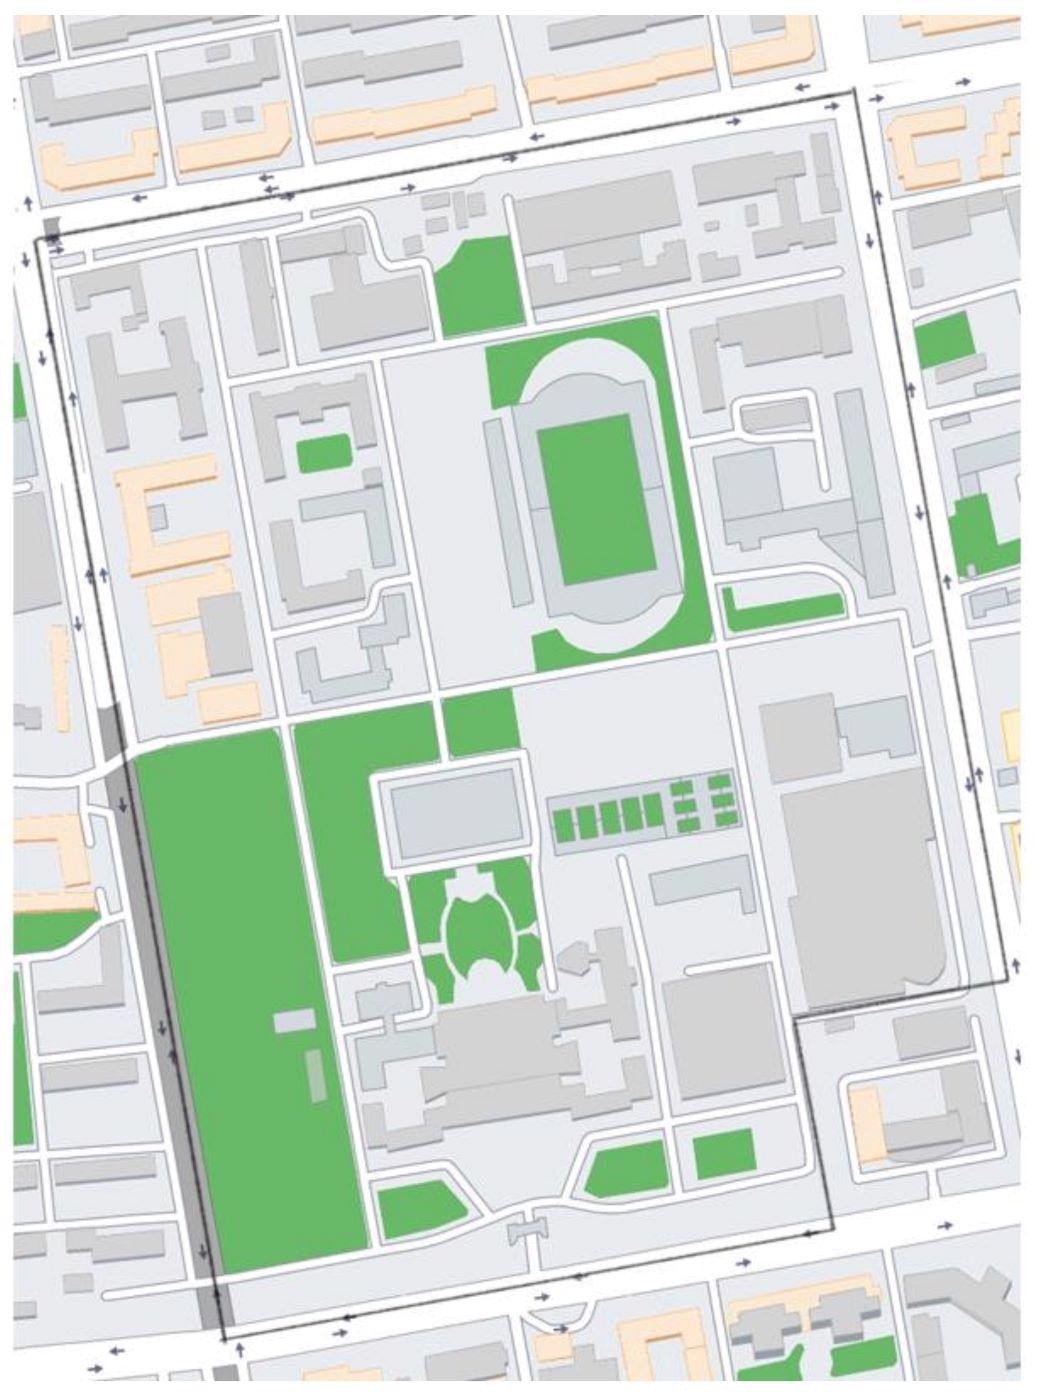 Plan view of the campus.